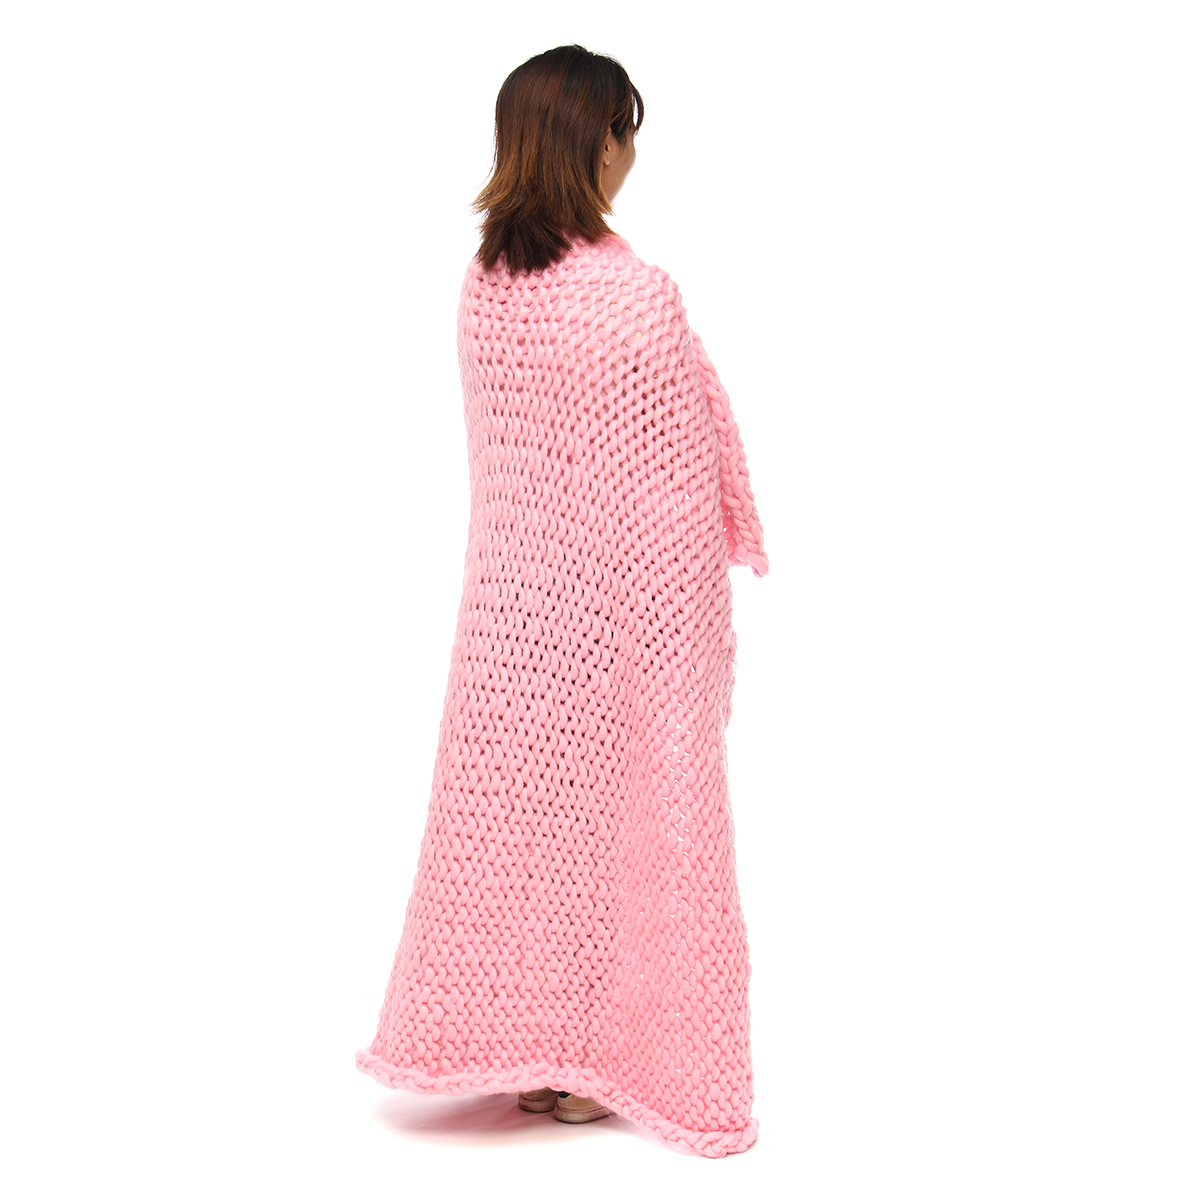 80x100CM-Handmade-Polyester-Fiber-Knitted-Blanket-Pure-Air-Conditioning-Bulky-Knitting-Throw-Blanket-1800712-8